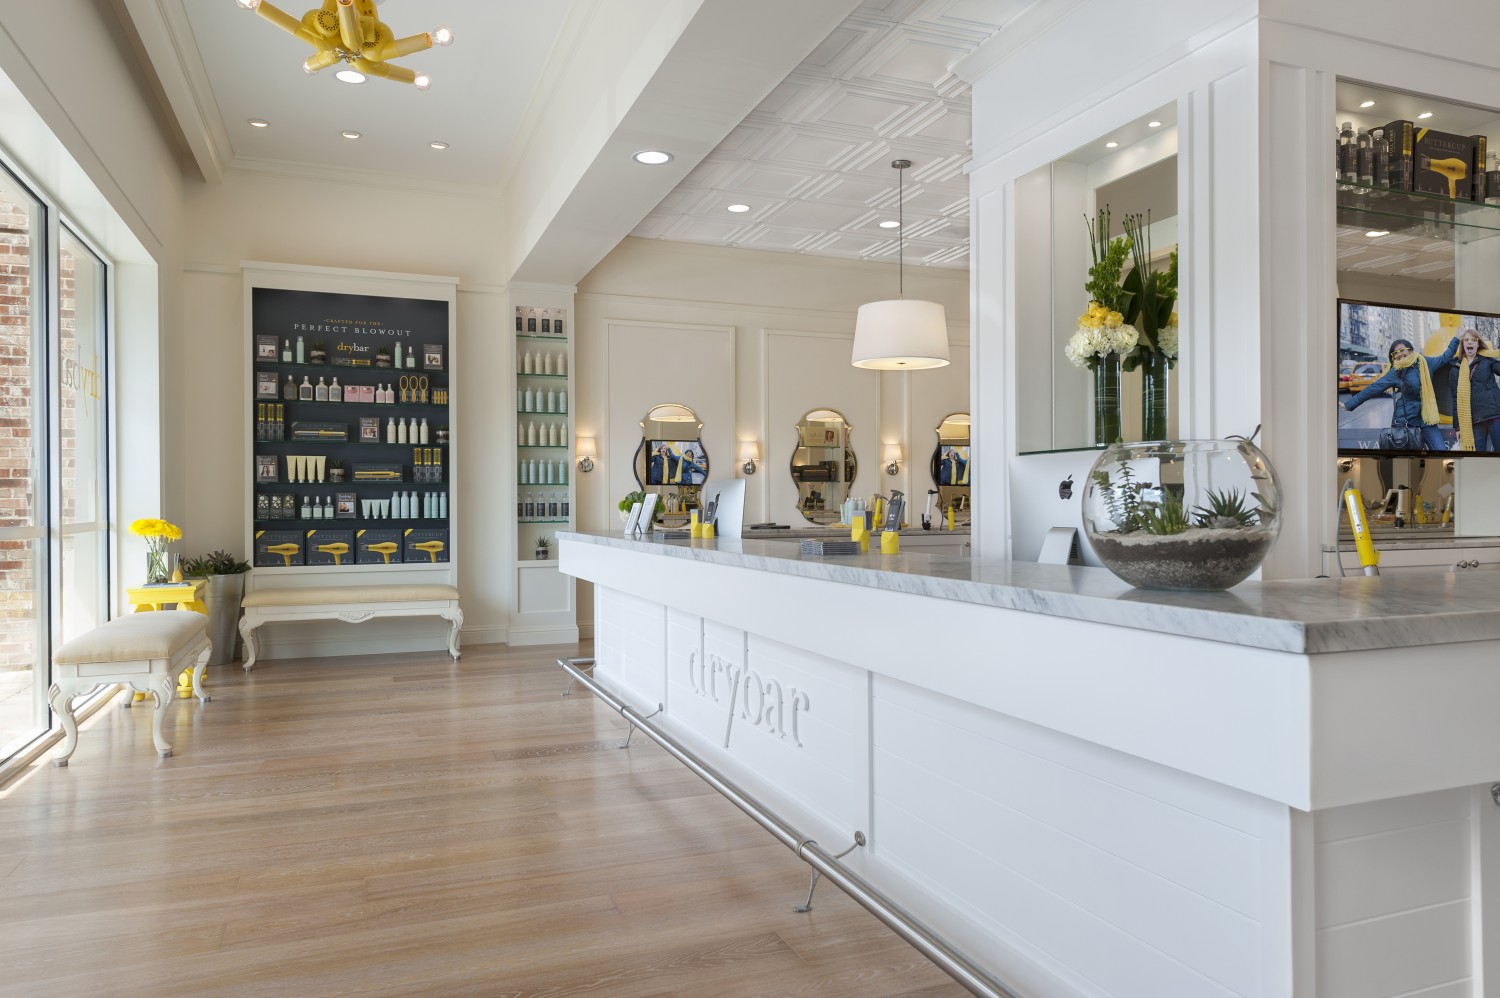 DRYBAR BLOWS INTO CARY AT WAVERLY PLACE WITH GRAND OPENING